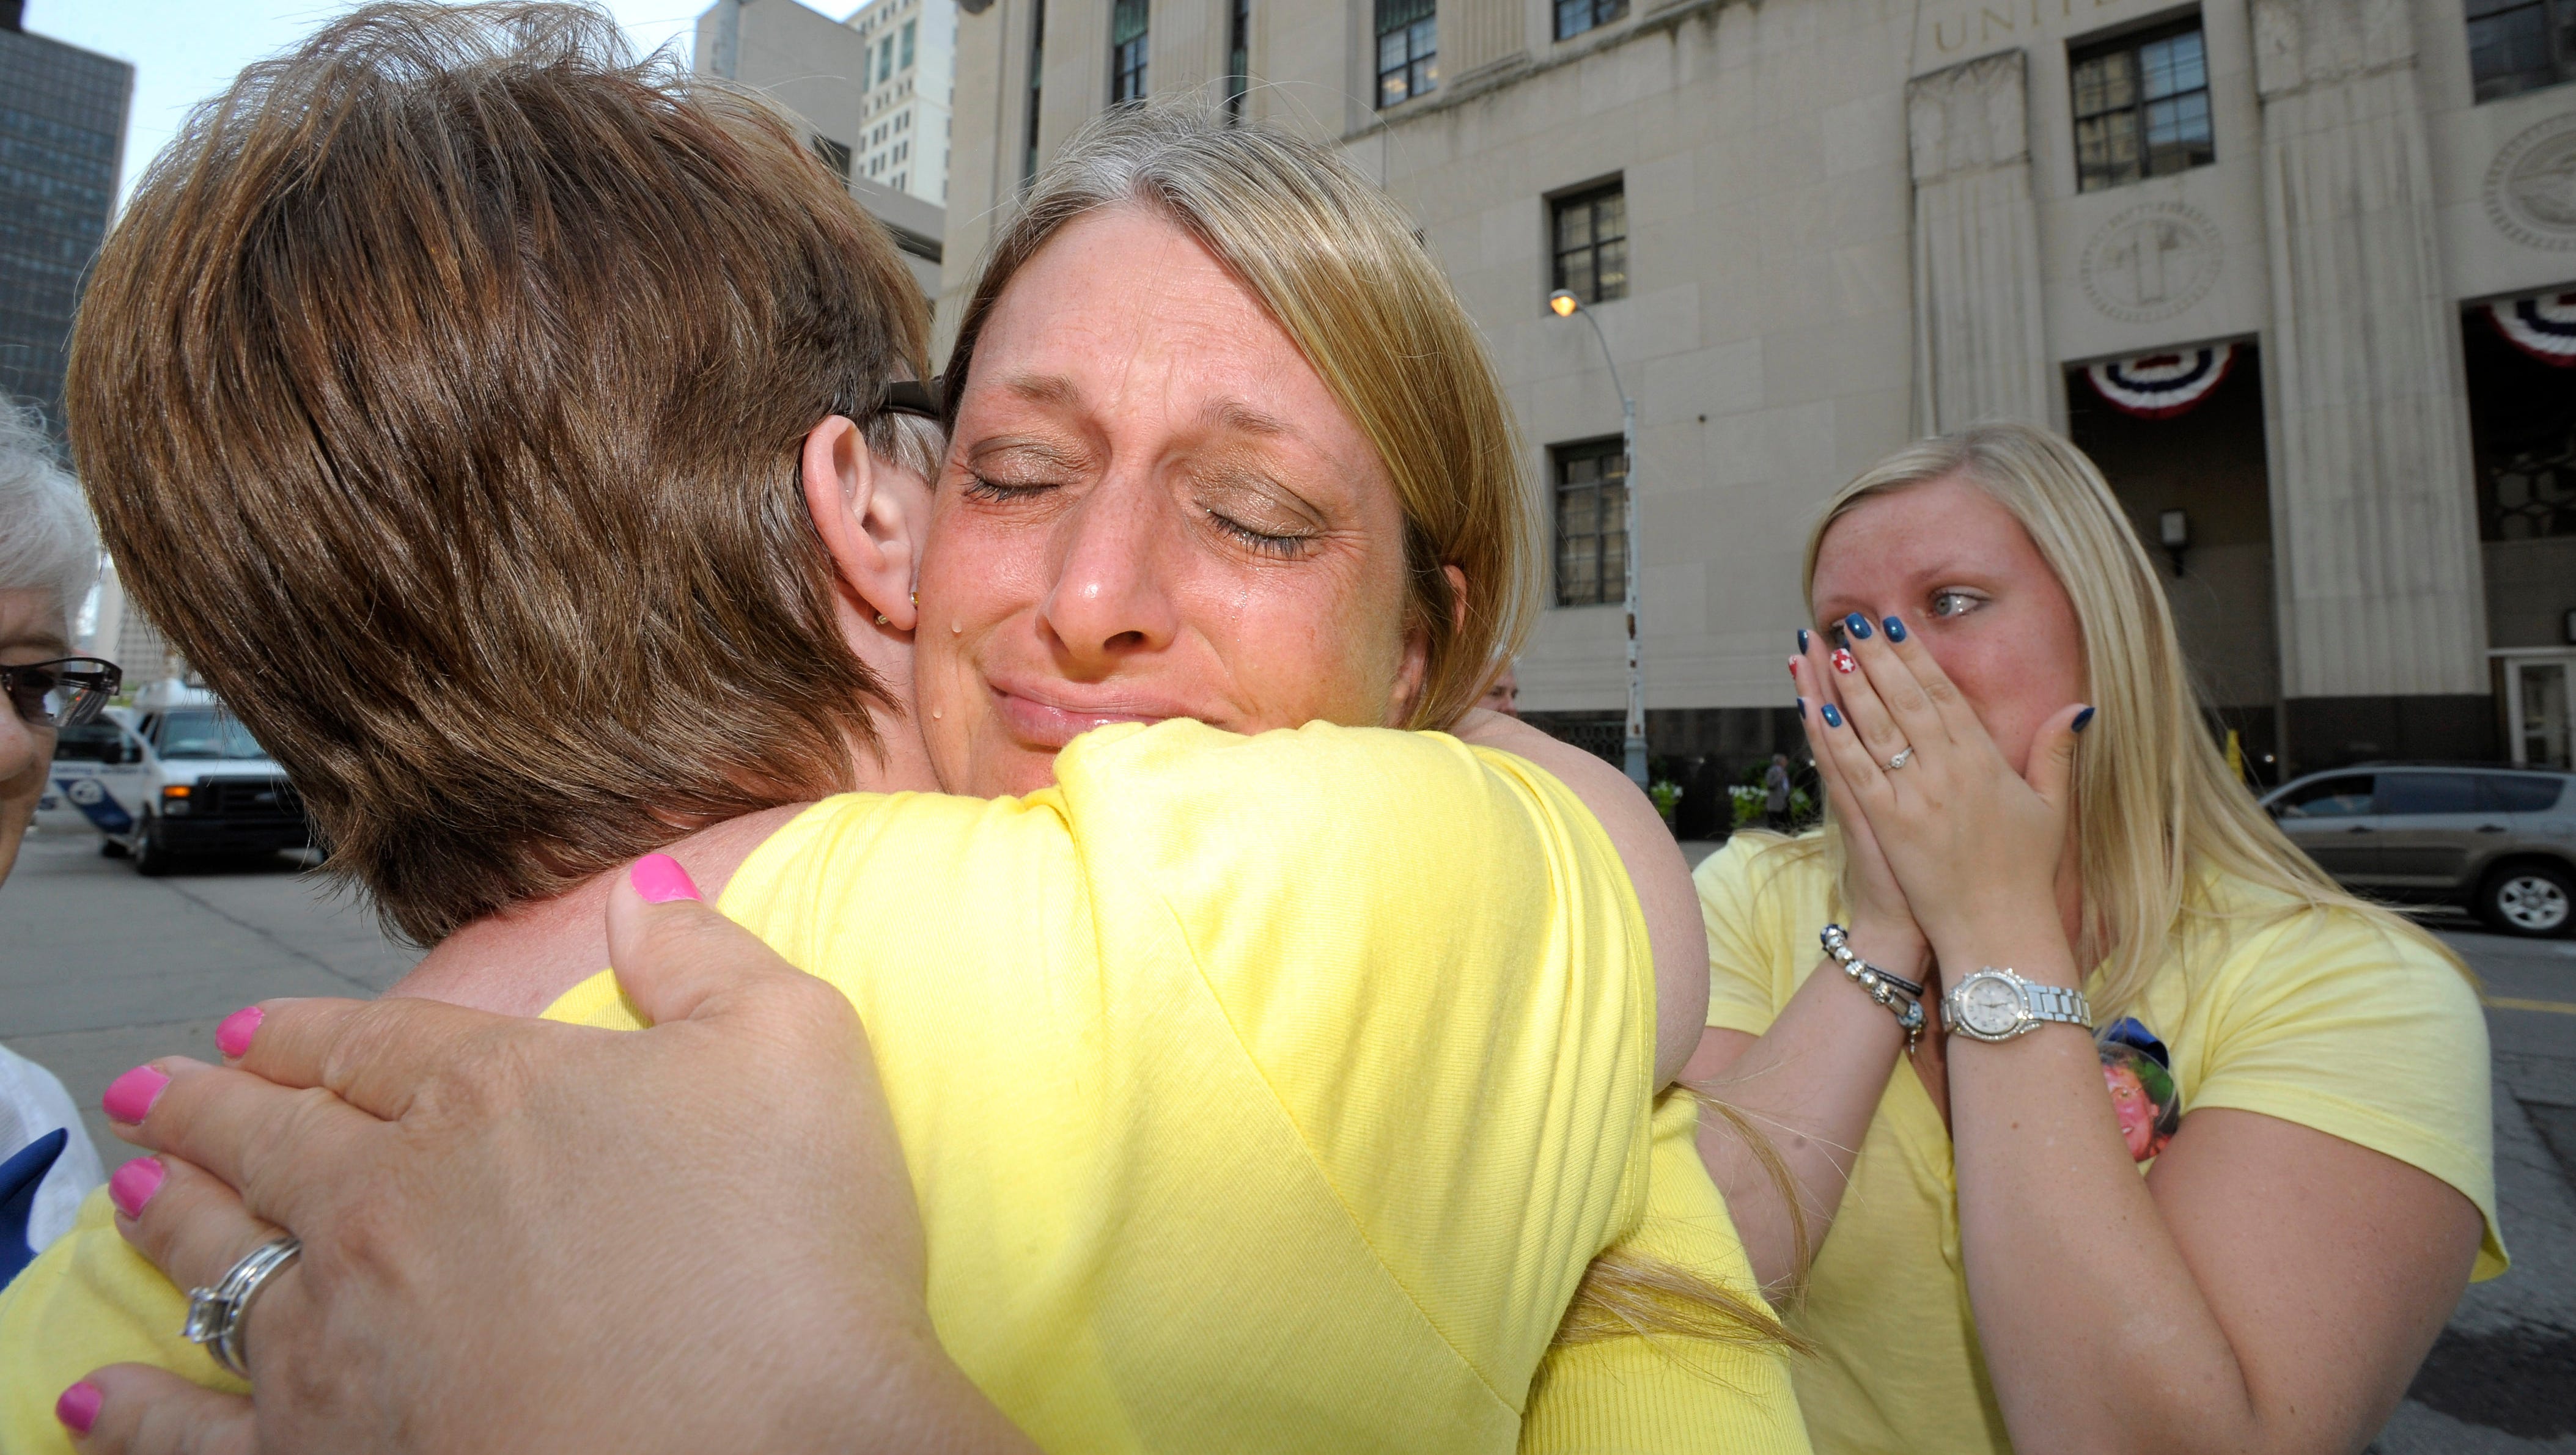 Geraldine Parkin, left, 54, of Davison, whose husband, Tim, is still alive after being overtreated by Farid Fata, hugs Cheryl Blades, center, whose mother, Nancy LaFrance, died of lung cancer. Blades daughter and LaFrance's granddaughter, Jessica Blades, right, 25, both of Waterford, also cries. Family members of victims express emotion as they leave the federal courthouse in Detroit, Friday afternoon, July 10, 2015, after they listen to the 45-year sentencing of Dr. Farid Fata for misdiagnosis of cancer and Medicare fraud.